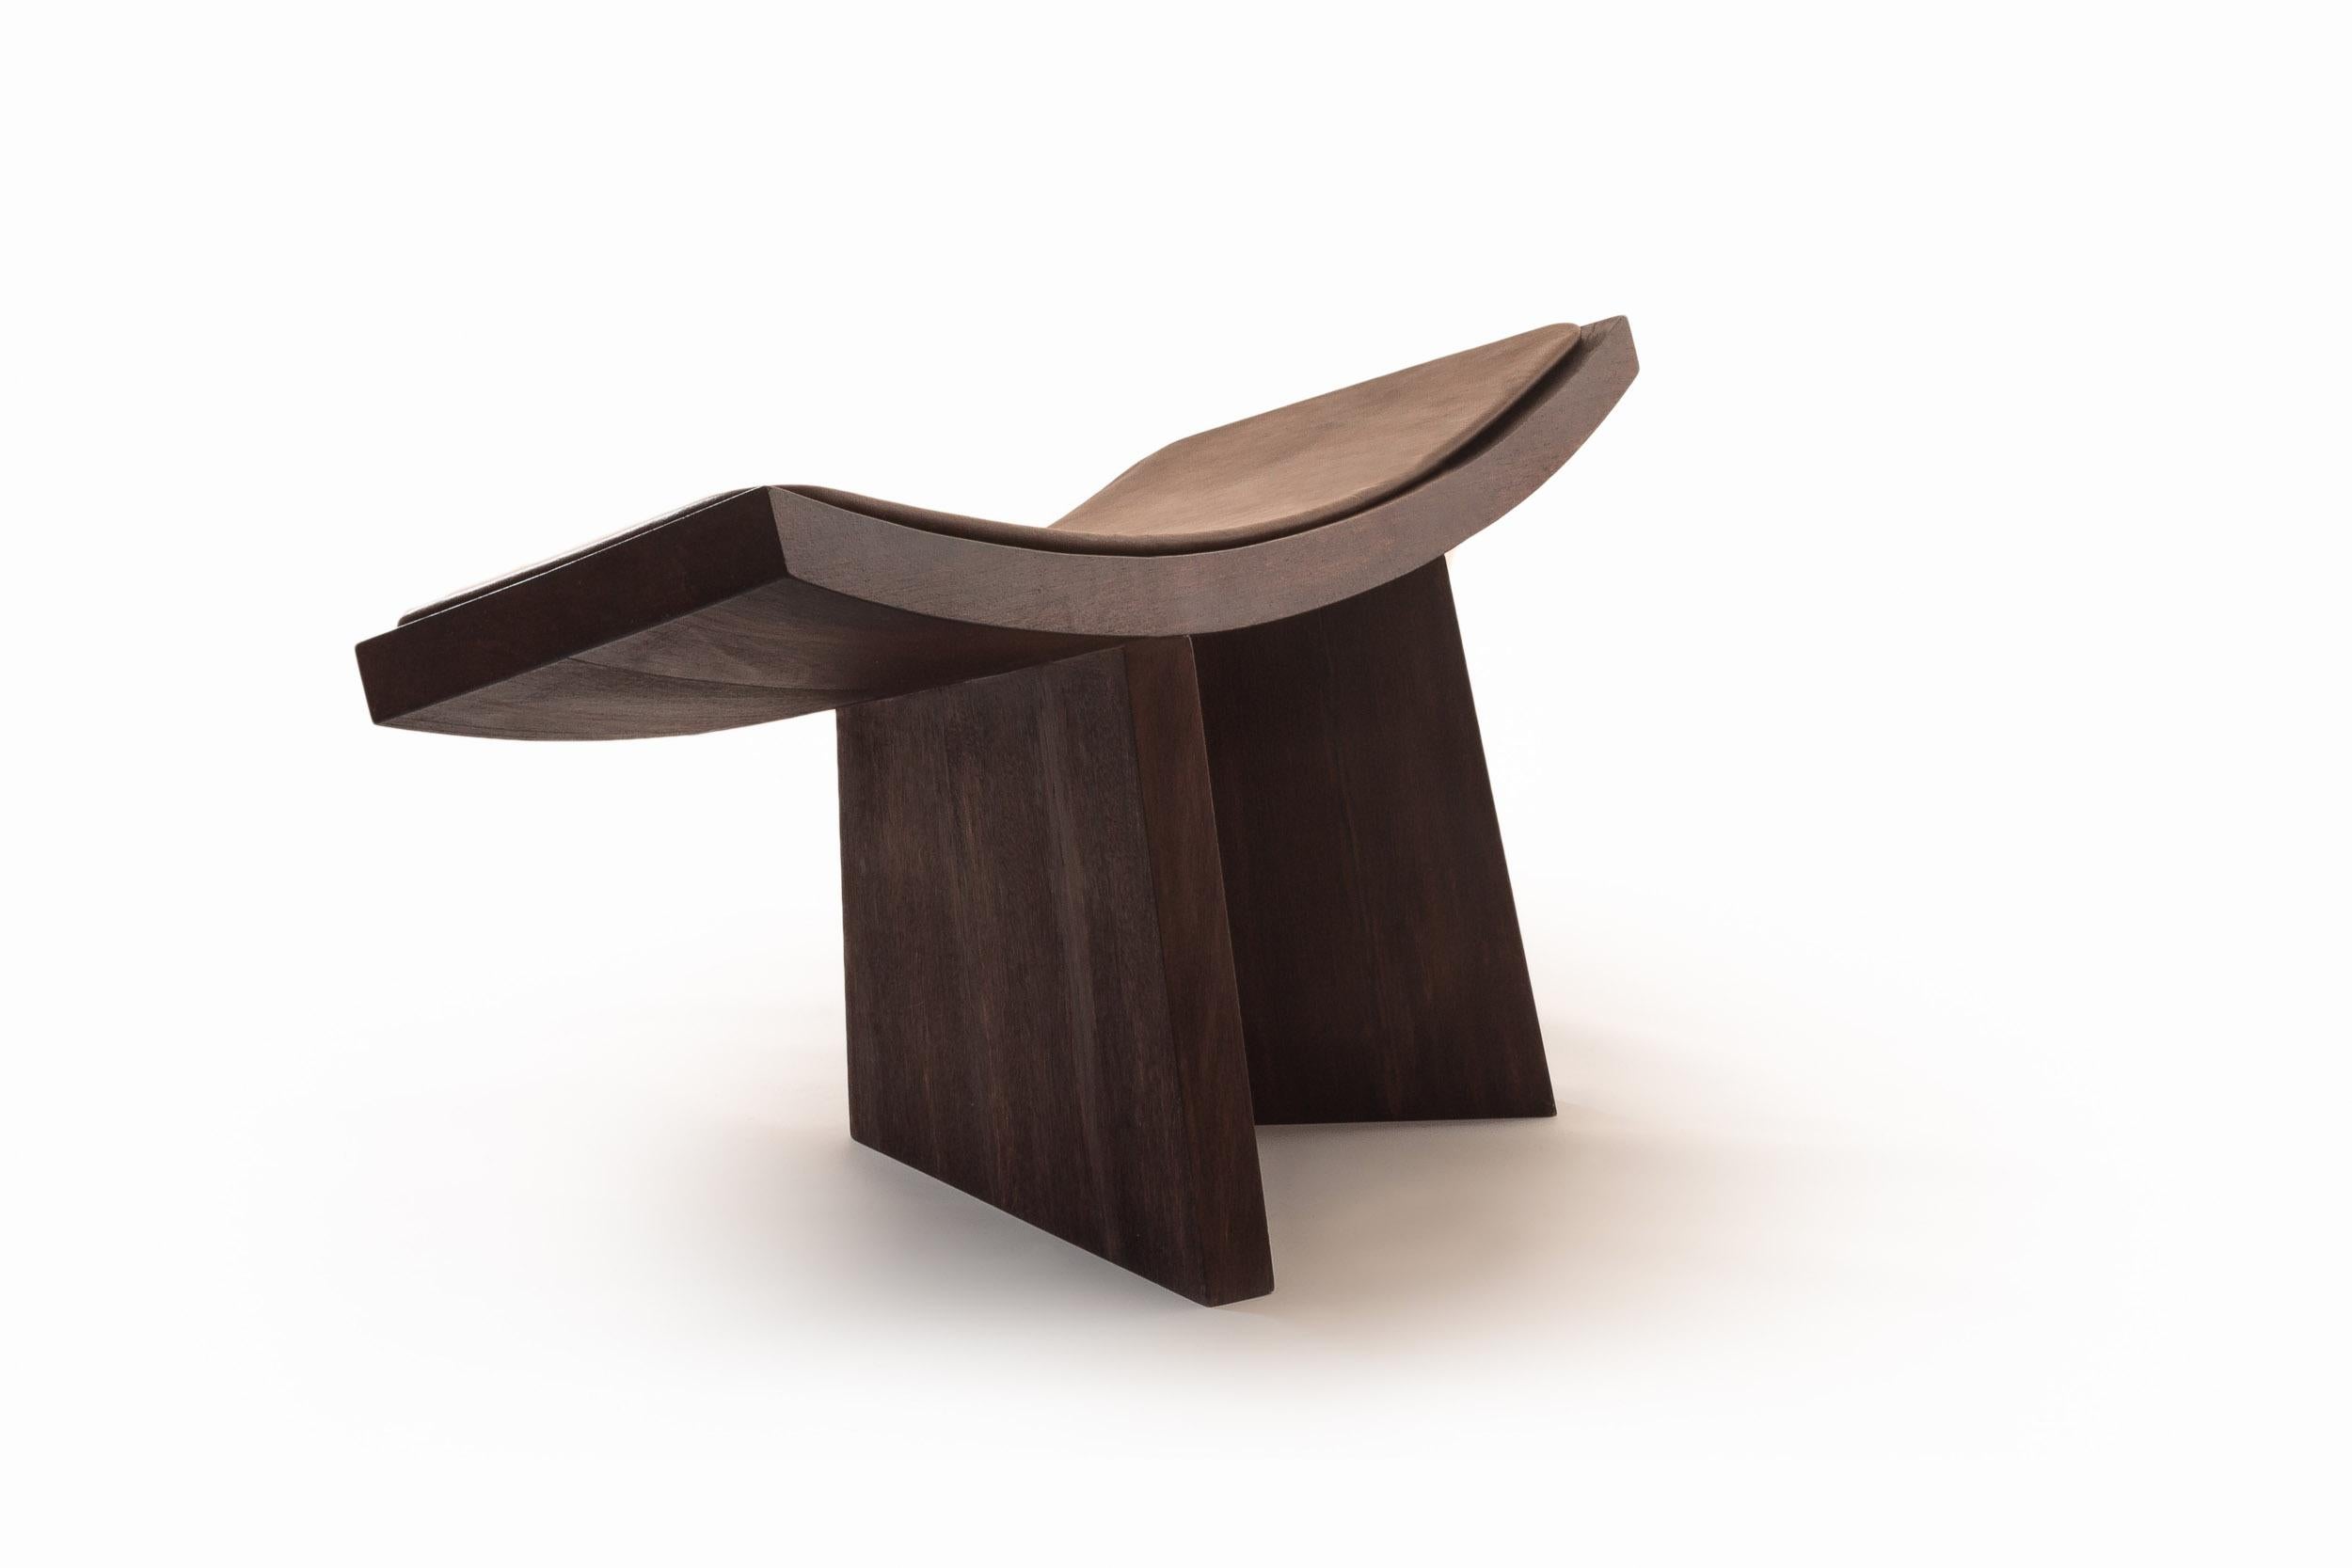 Stool Coba by Camilo Andres Rodriguez Marquez (aka CarmWorks)

Solid oak or cedar / Burnt wood or natural

Optional textile or leather seat can be added with an additional cost 

Suitable for outdoor use

Each piece is made to order and hand